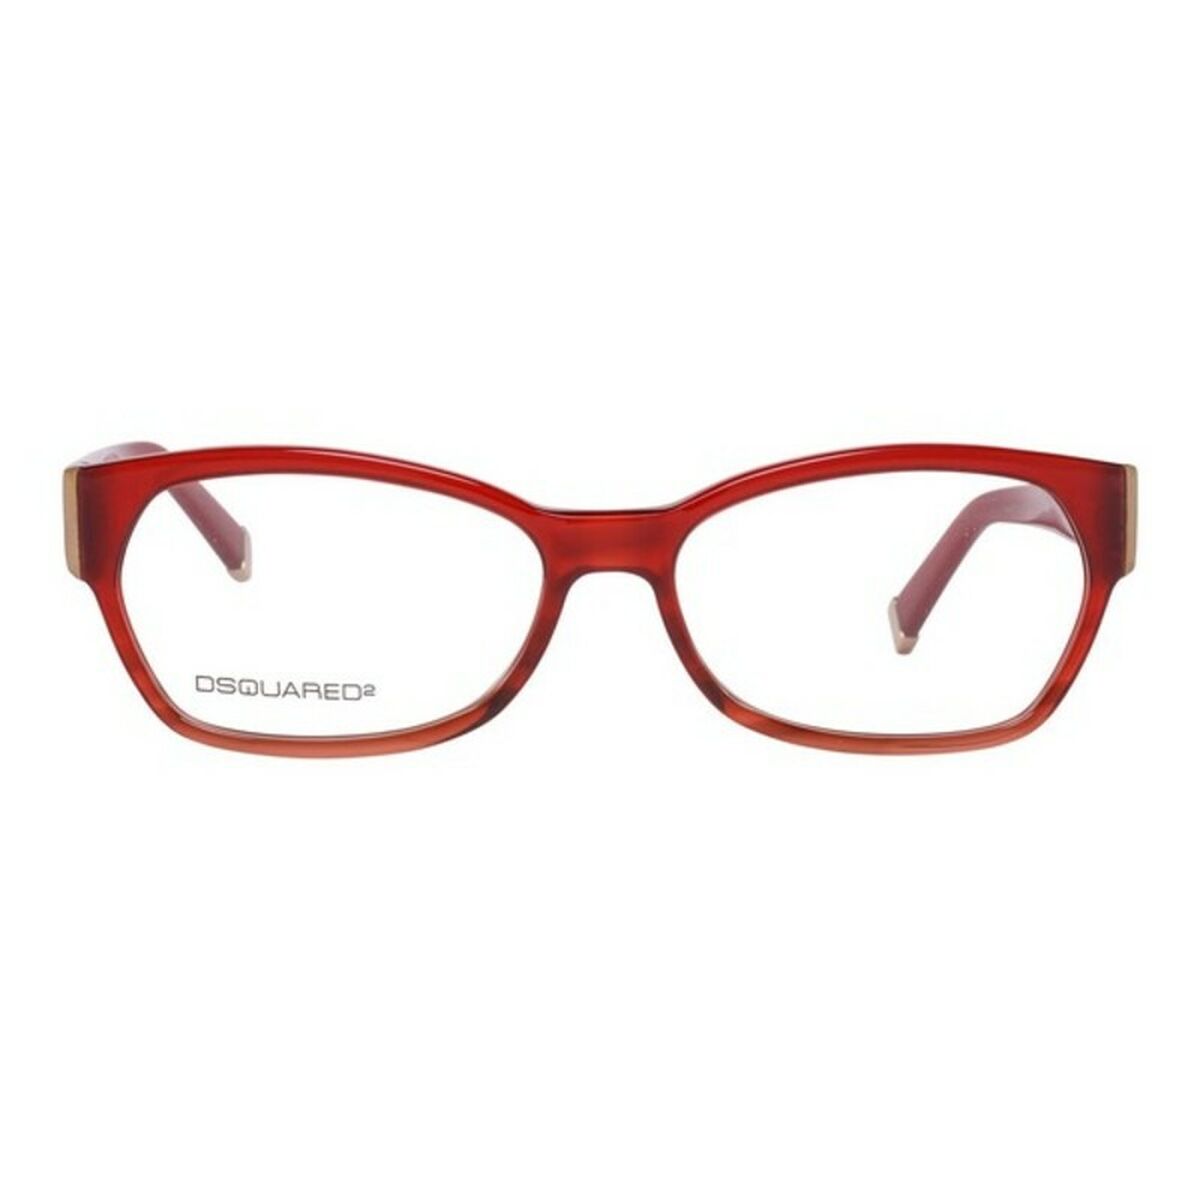 Ladies'Spectacle frame Dsquared2 DQ5045-068 (ø 55 mm) Red (ø 55 mm)